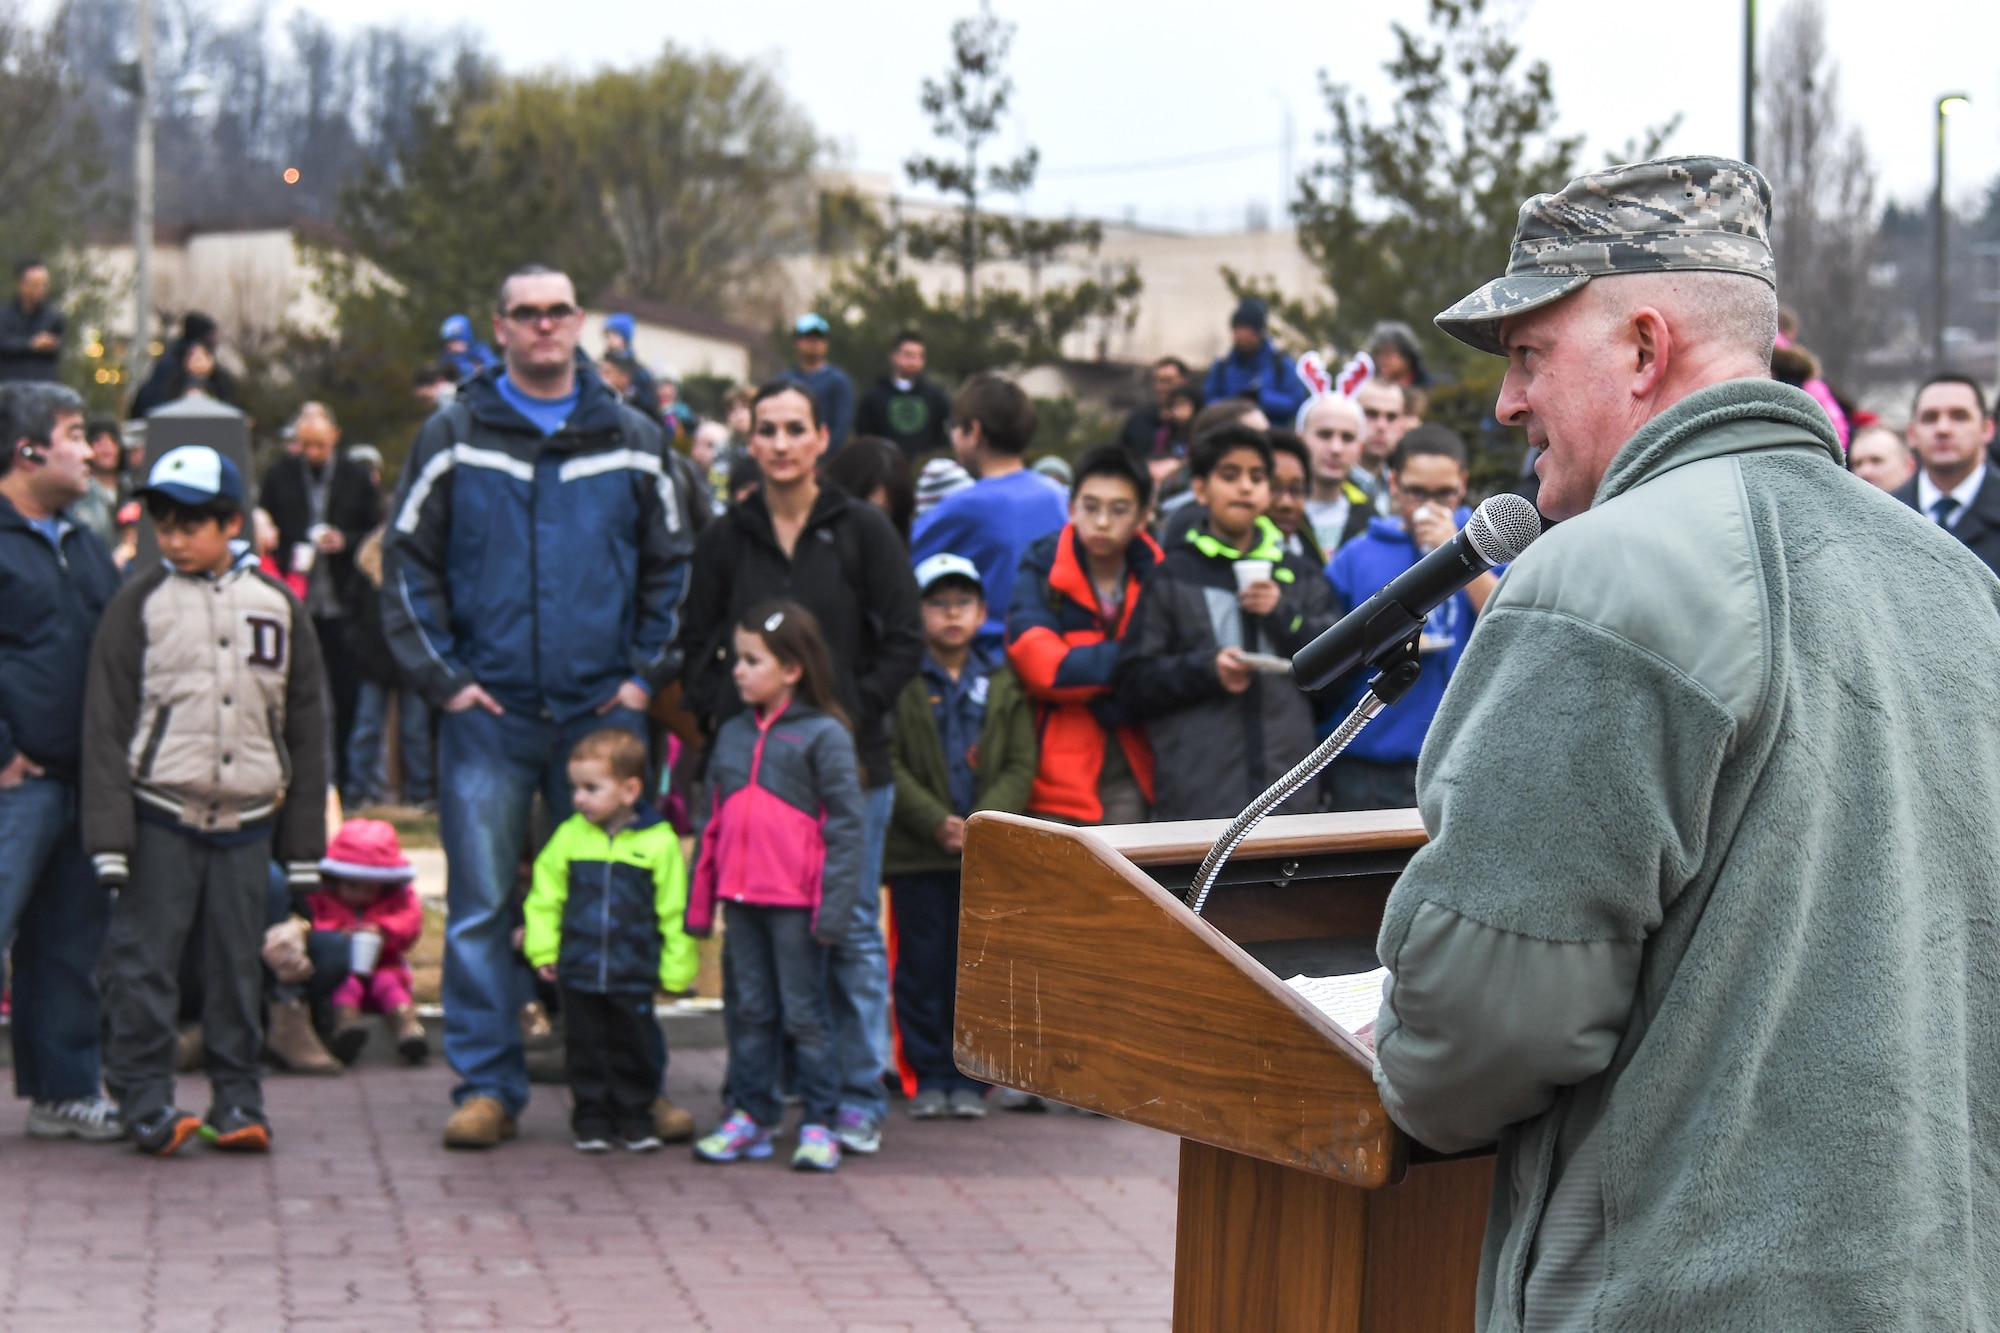 Col. Andrew Hansen, 51st Fighter Wing commander, addresses service members and their families at the opening of the Christmas tree lighting ceremony at Osan Air Base, Republic of Korea, Dec. 8, 2016. Hansen encouraged everyone to support and care for themselves and to not miss out on any festivities going on around the base. (U.S. Air Force photo by Tech. Sgt. Rasheen Douglas)